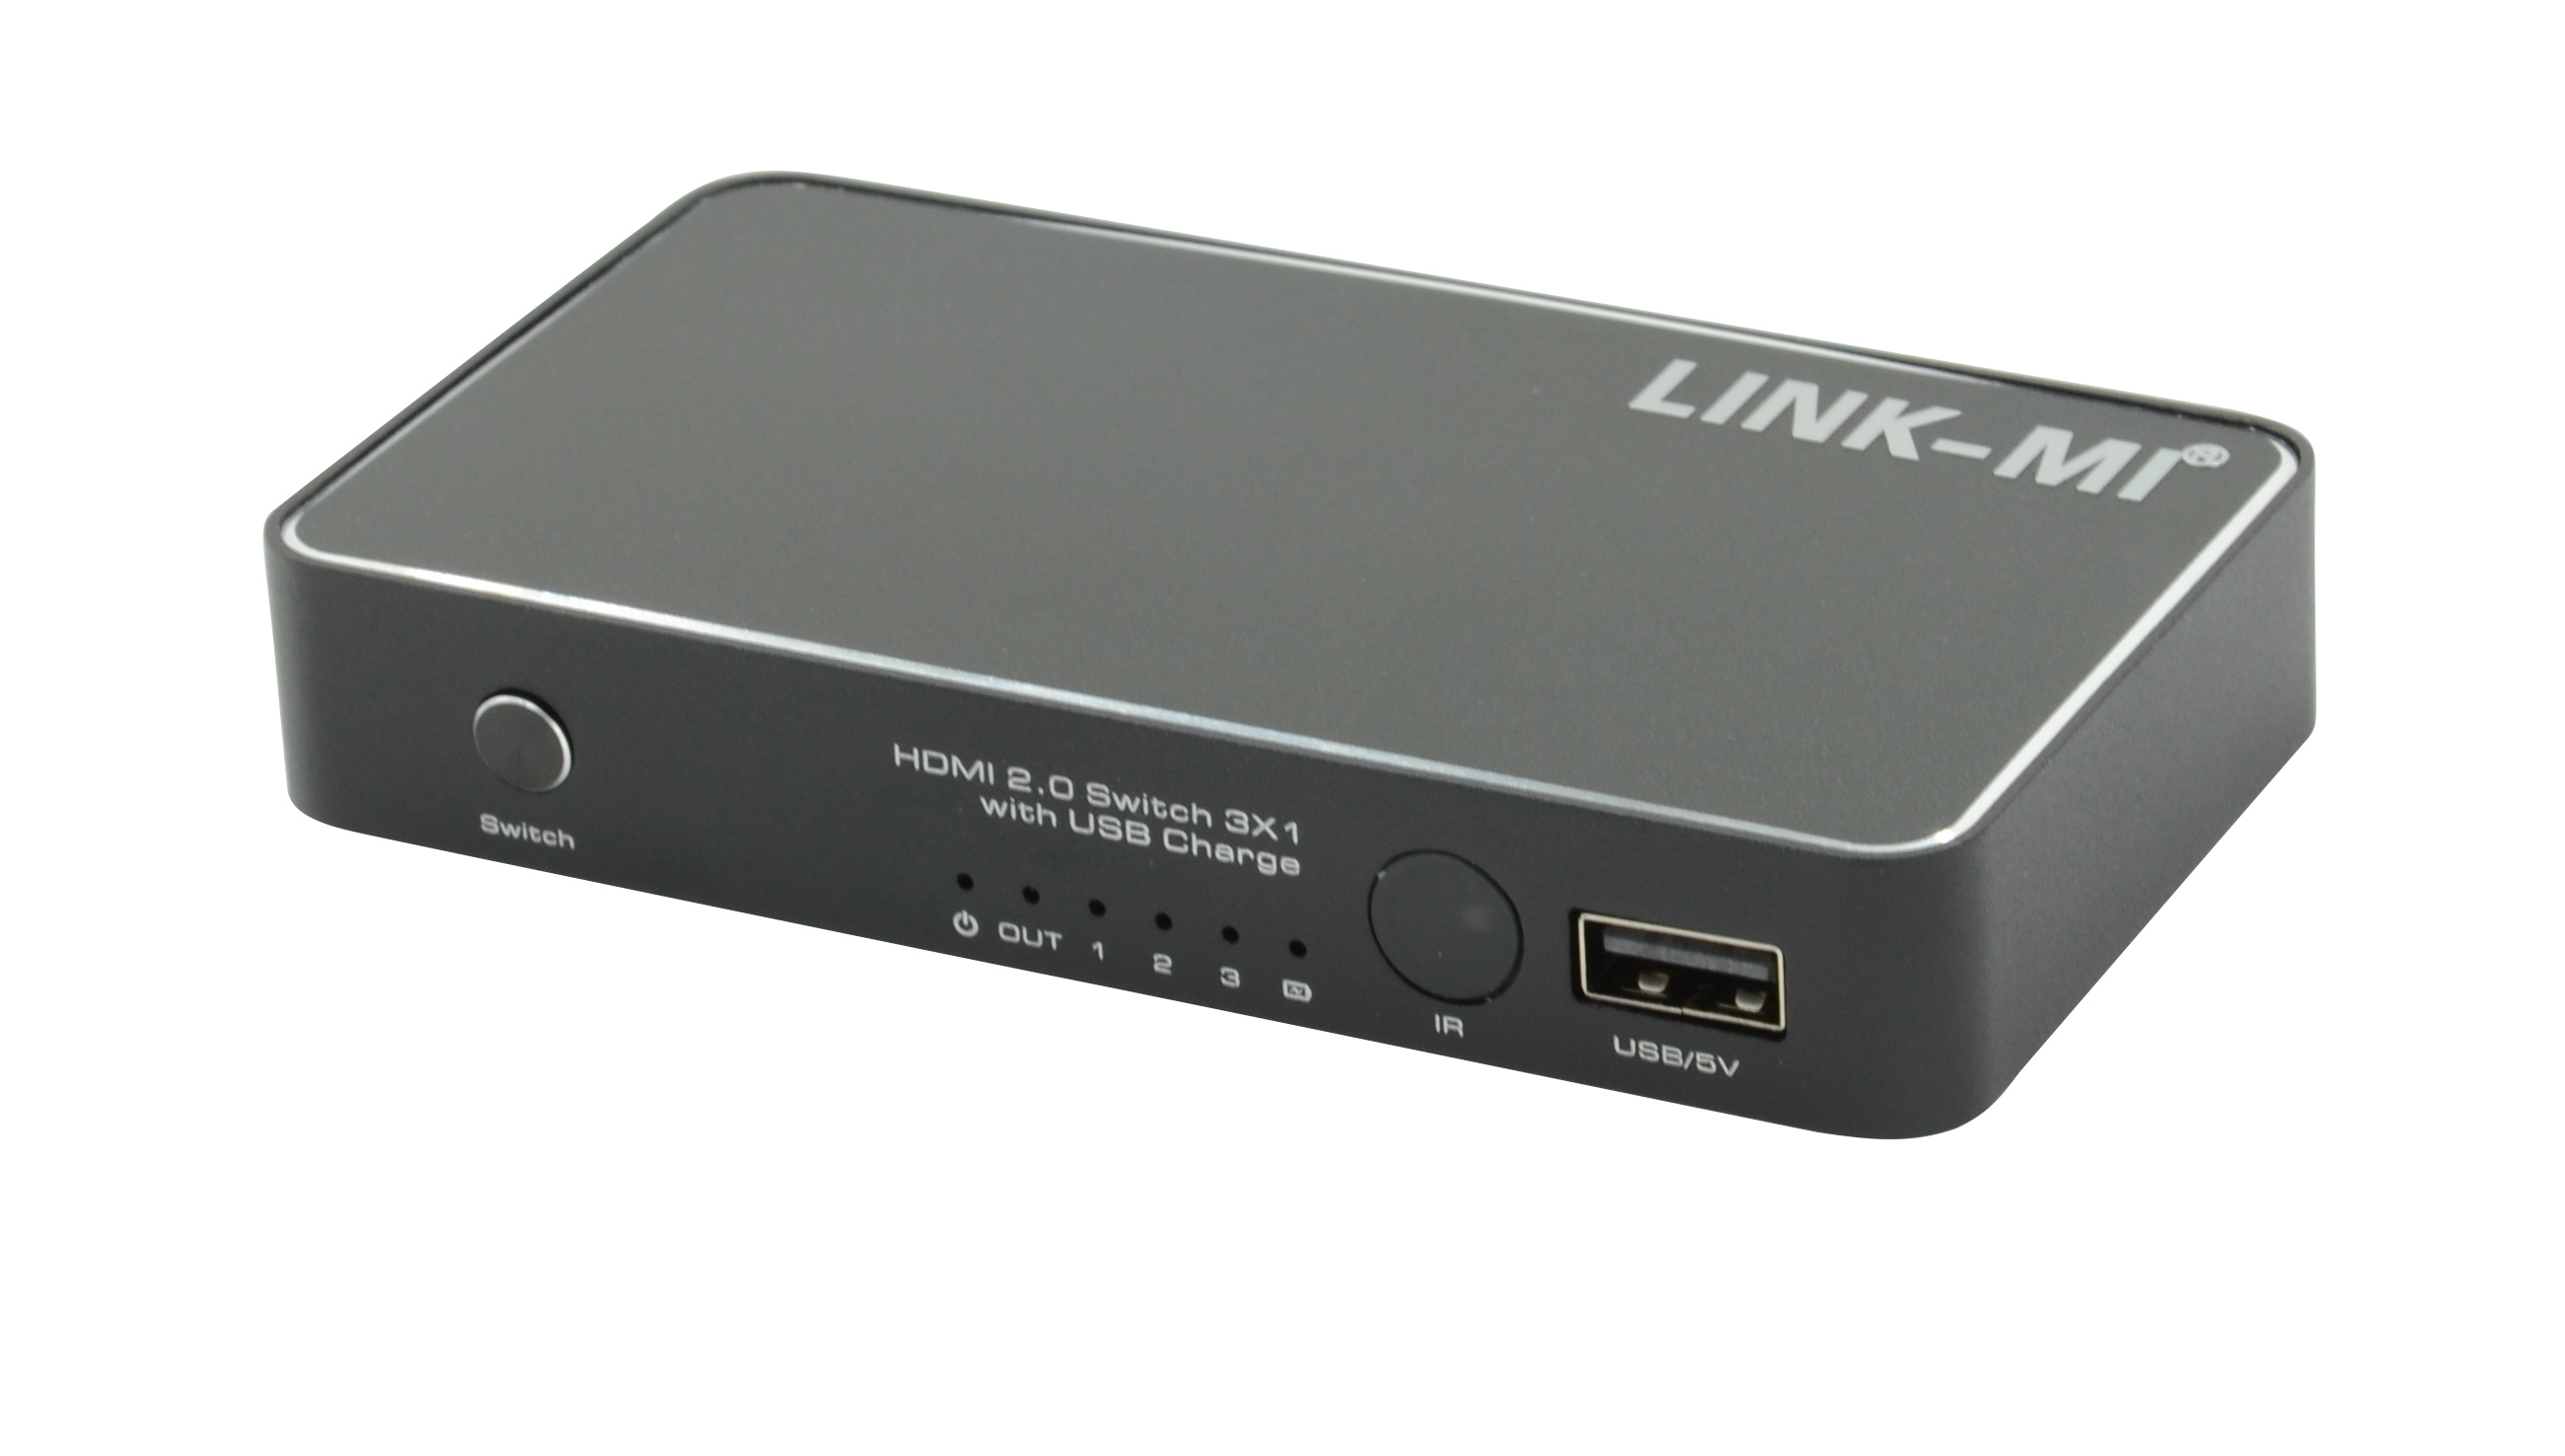 LINK-MI LM-2.0H301 HDMI2.0 3X1 SWITCH withUSB Charge